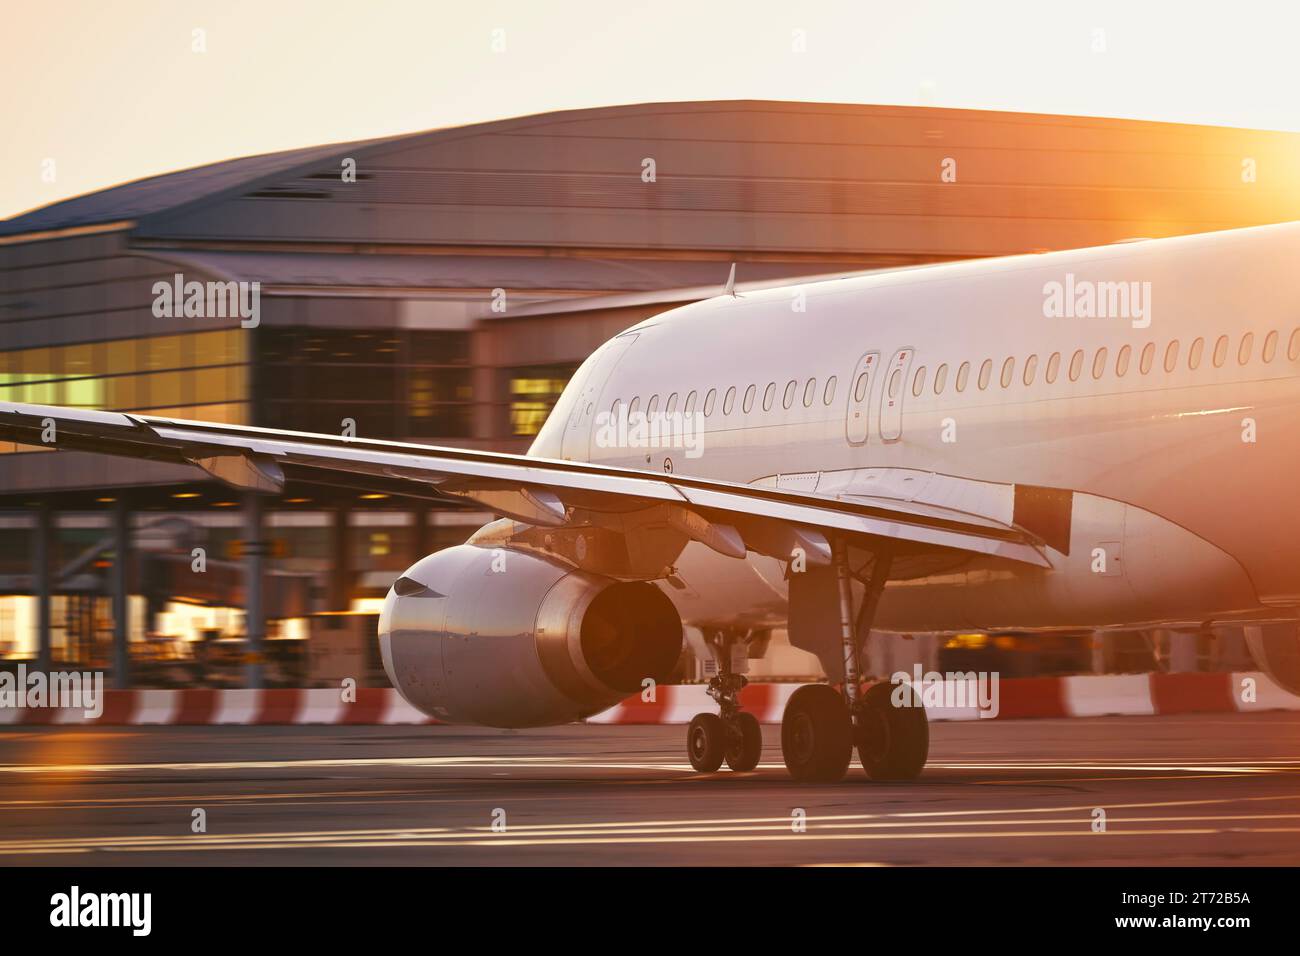 Airplane at busy airport. Passenger plane on the move against terminal building at beautiful sunrise. Stock Photo